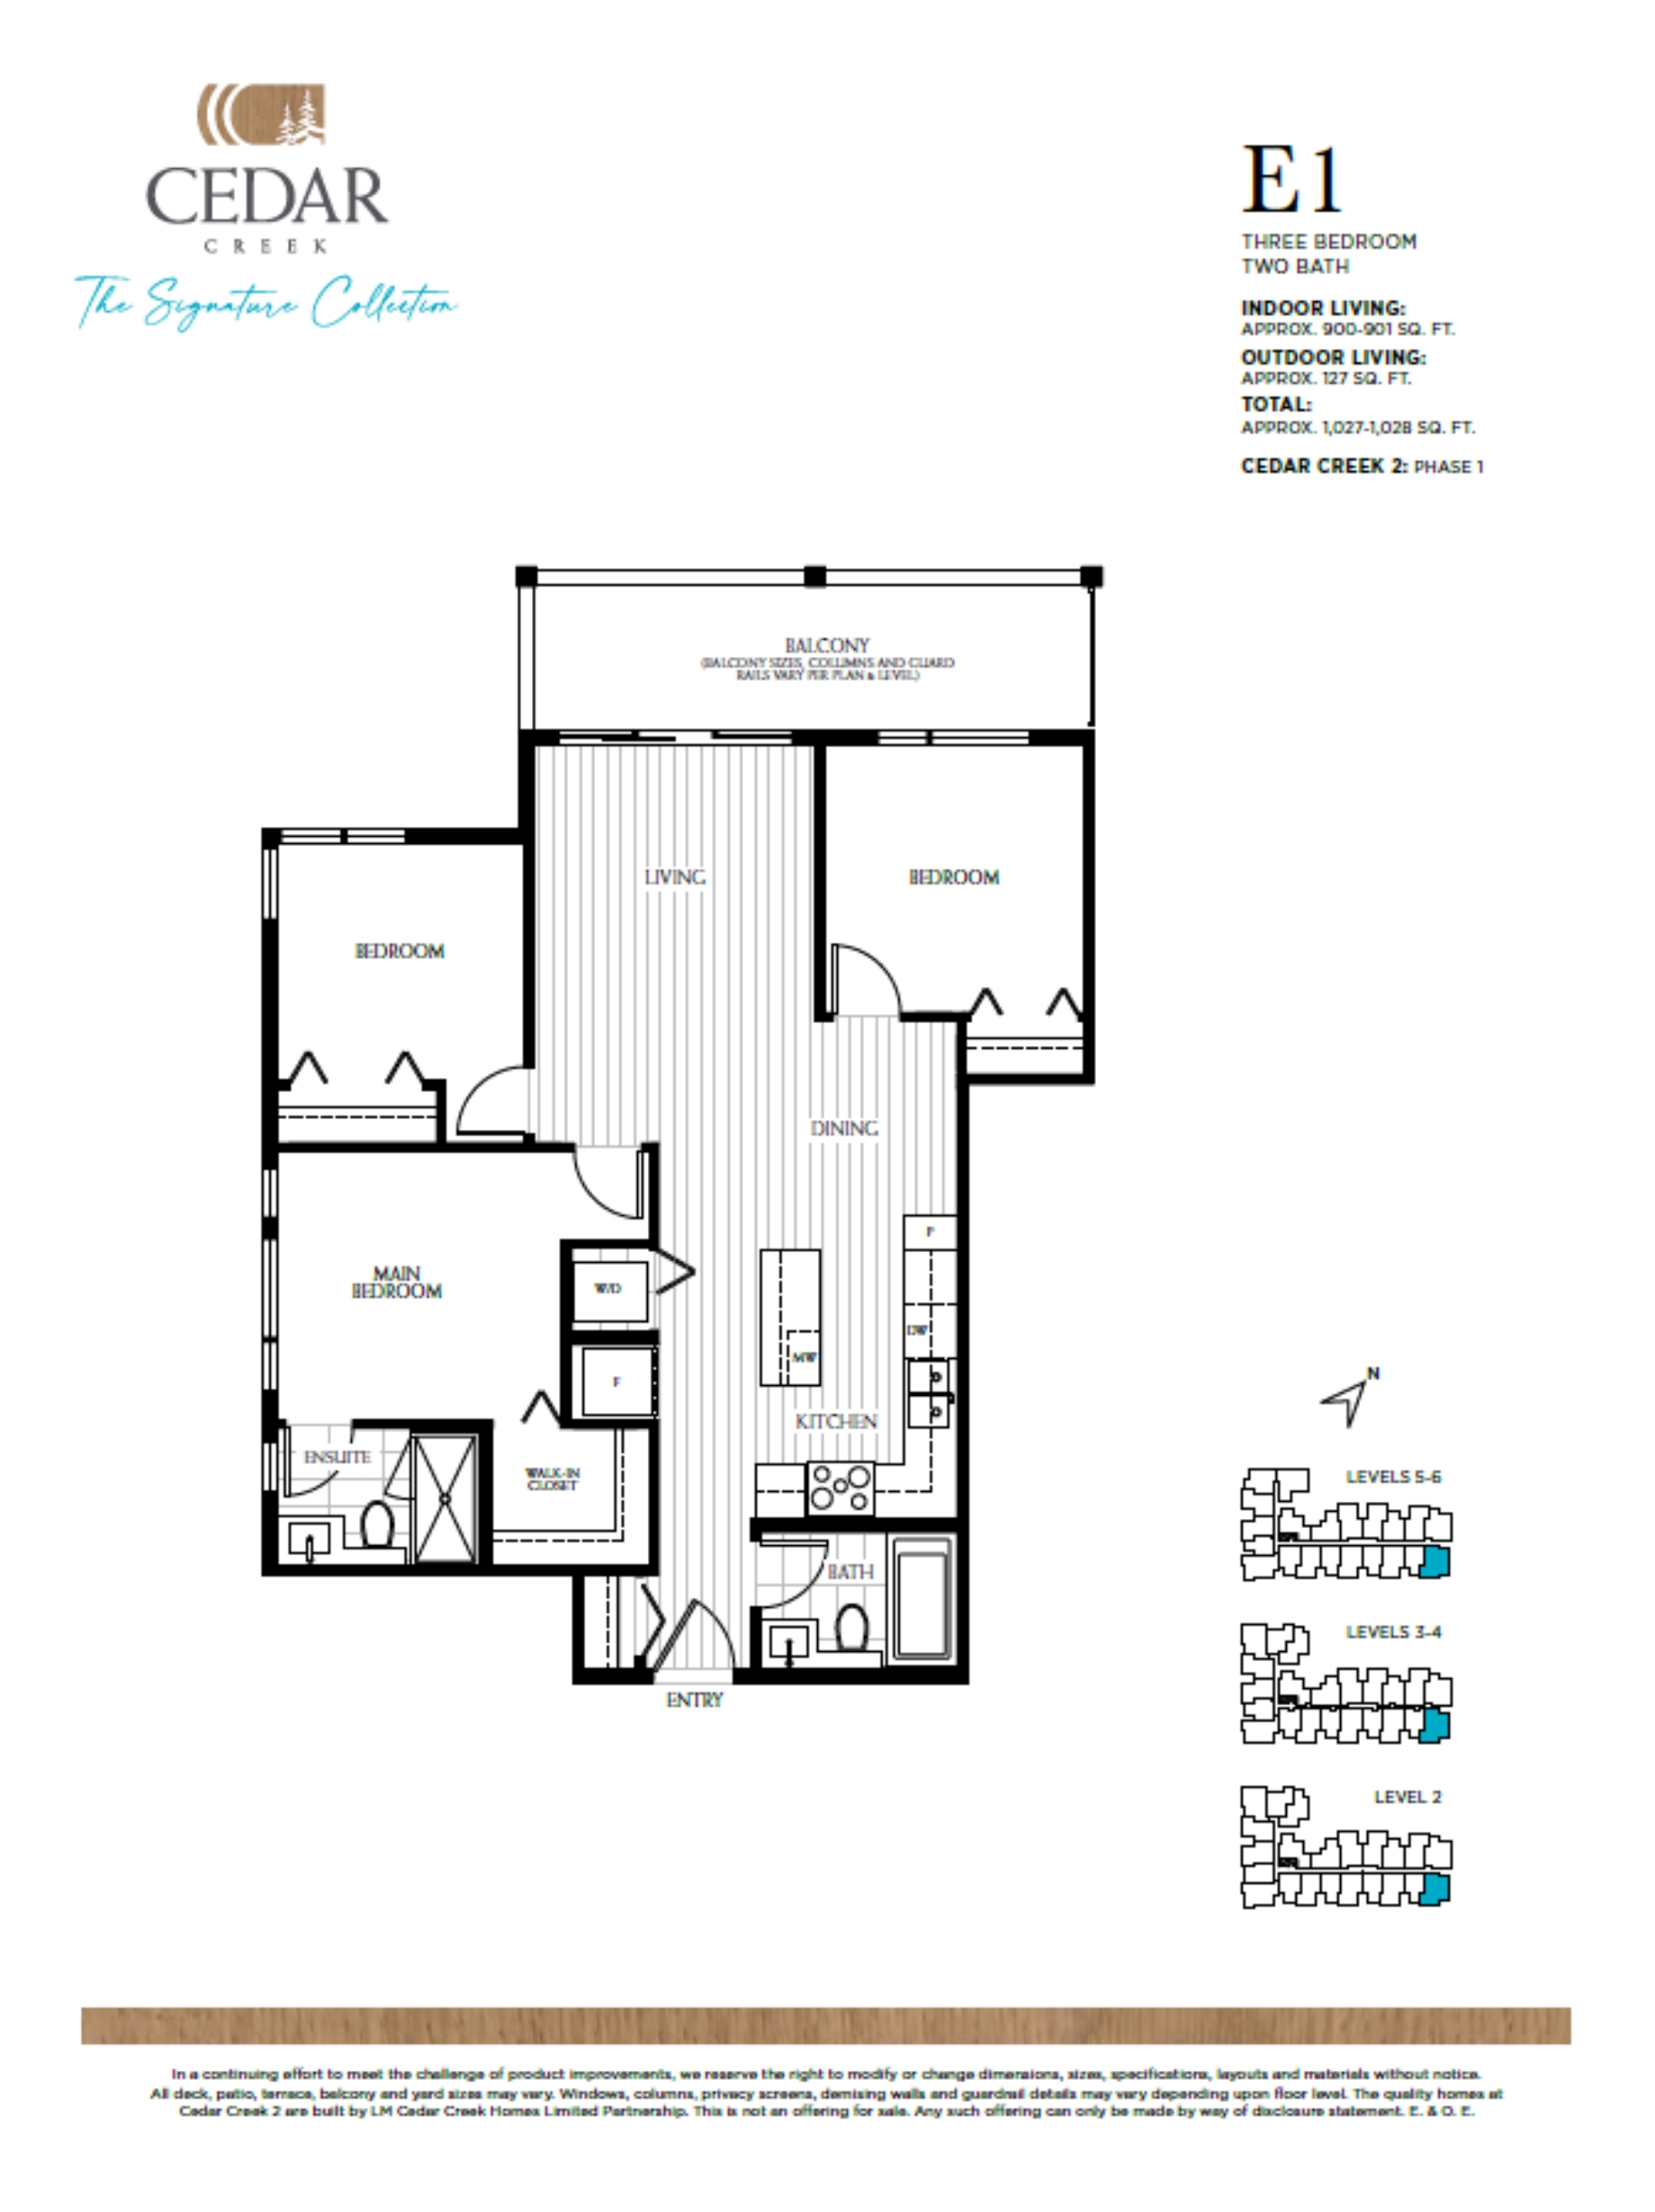 E1 Floor Plan of Cedar Creek (Signature Collection) Condos with undefined beds